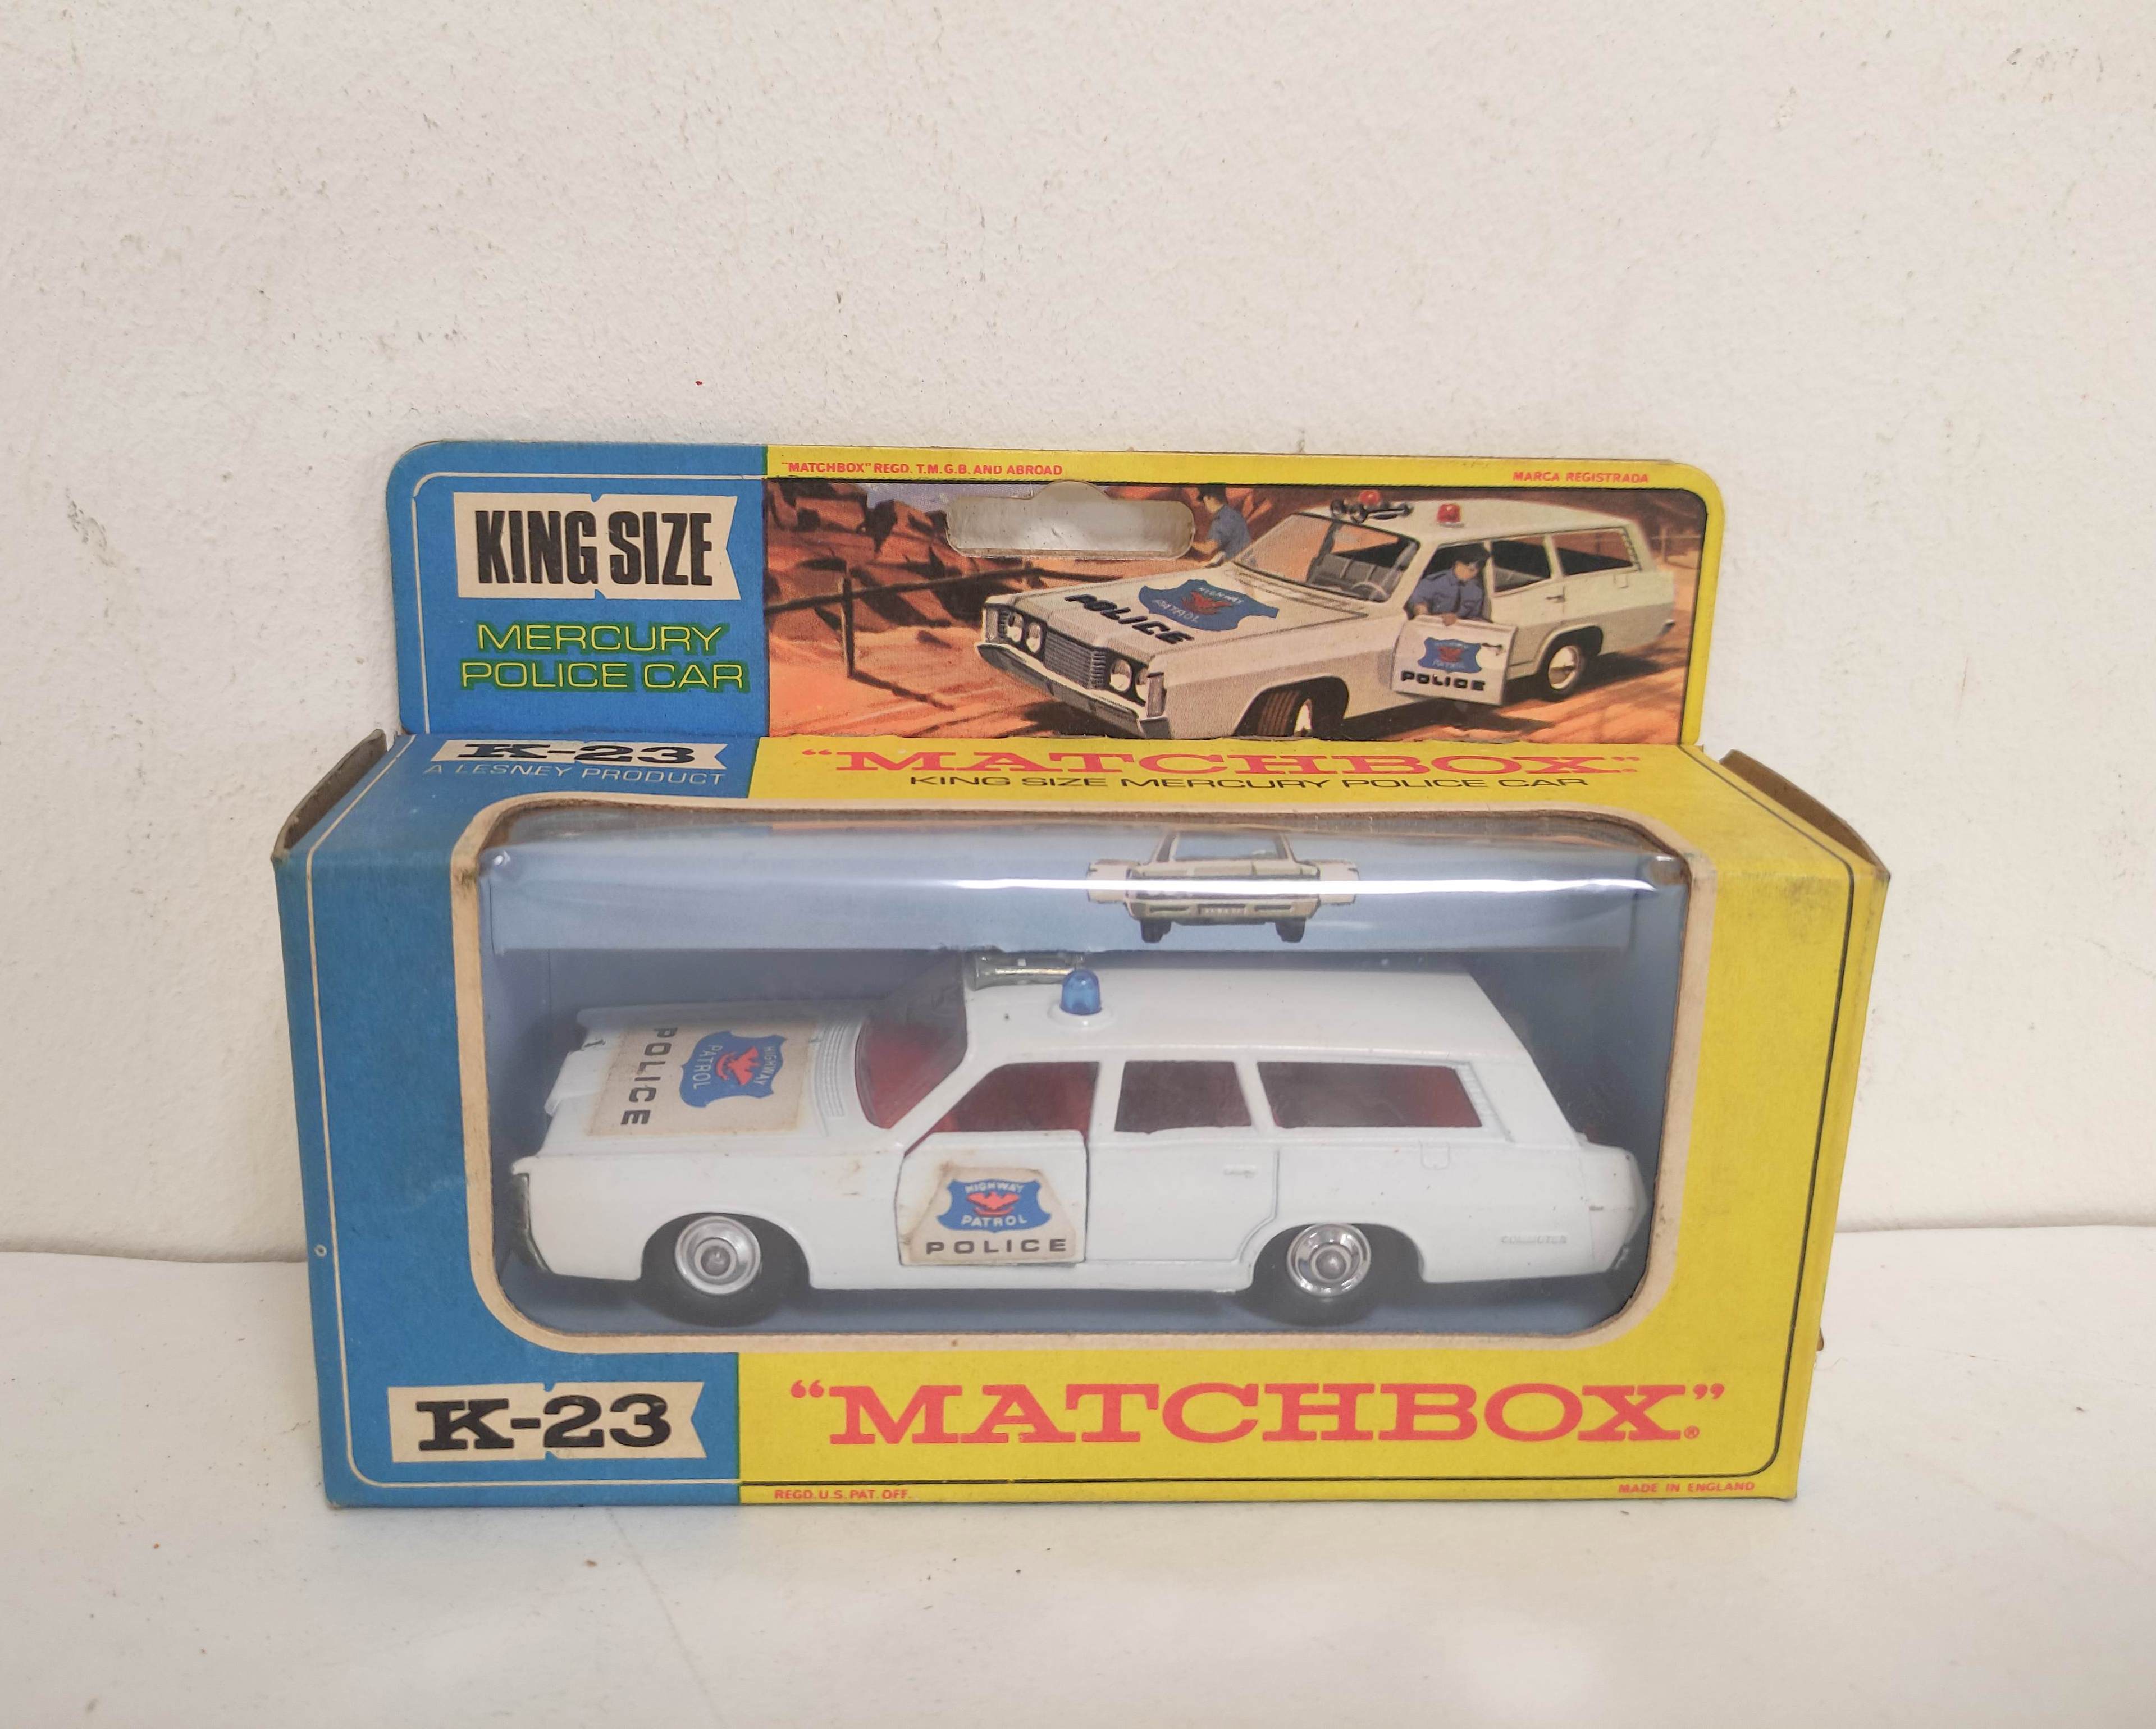 Three vintage boxed Matchbox Kingsize model vehicles to include a Mercury Police Car K-23, - Image 2 of 5